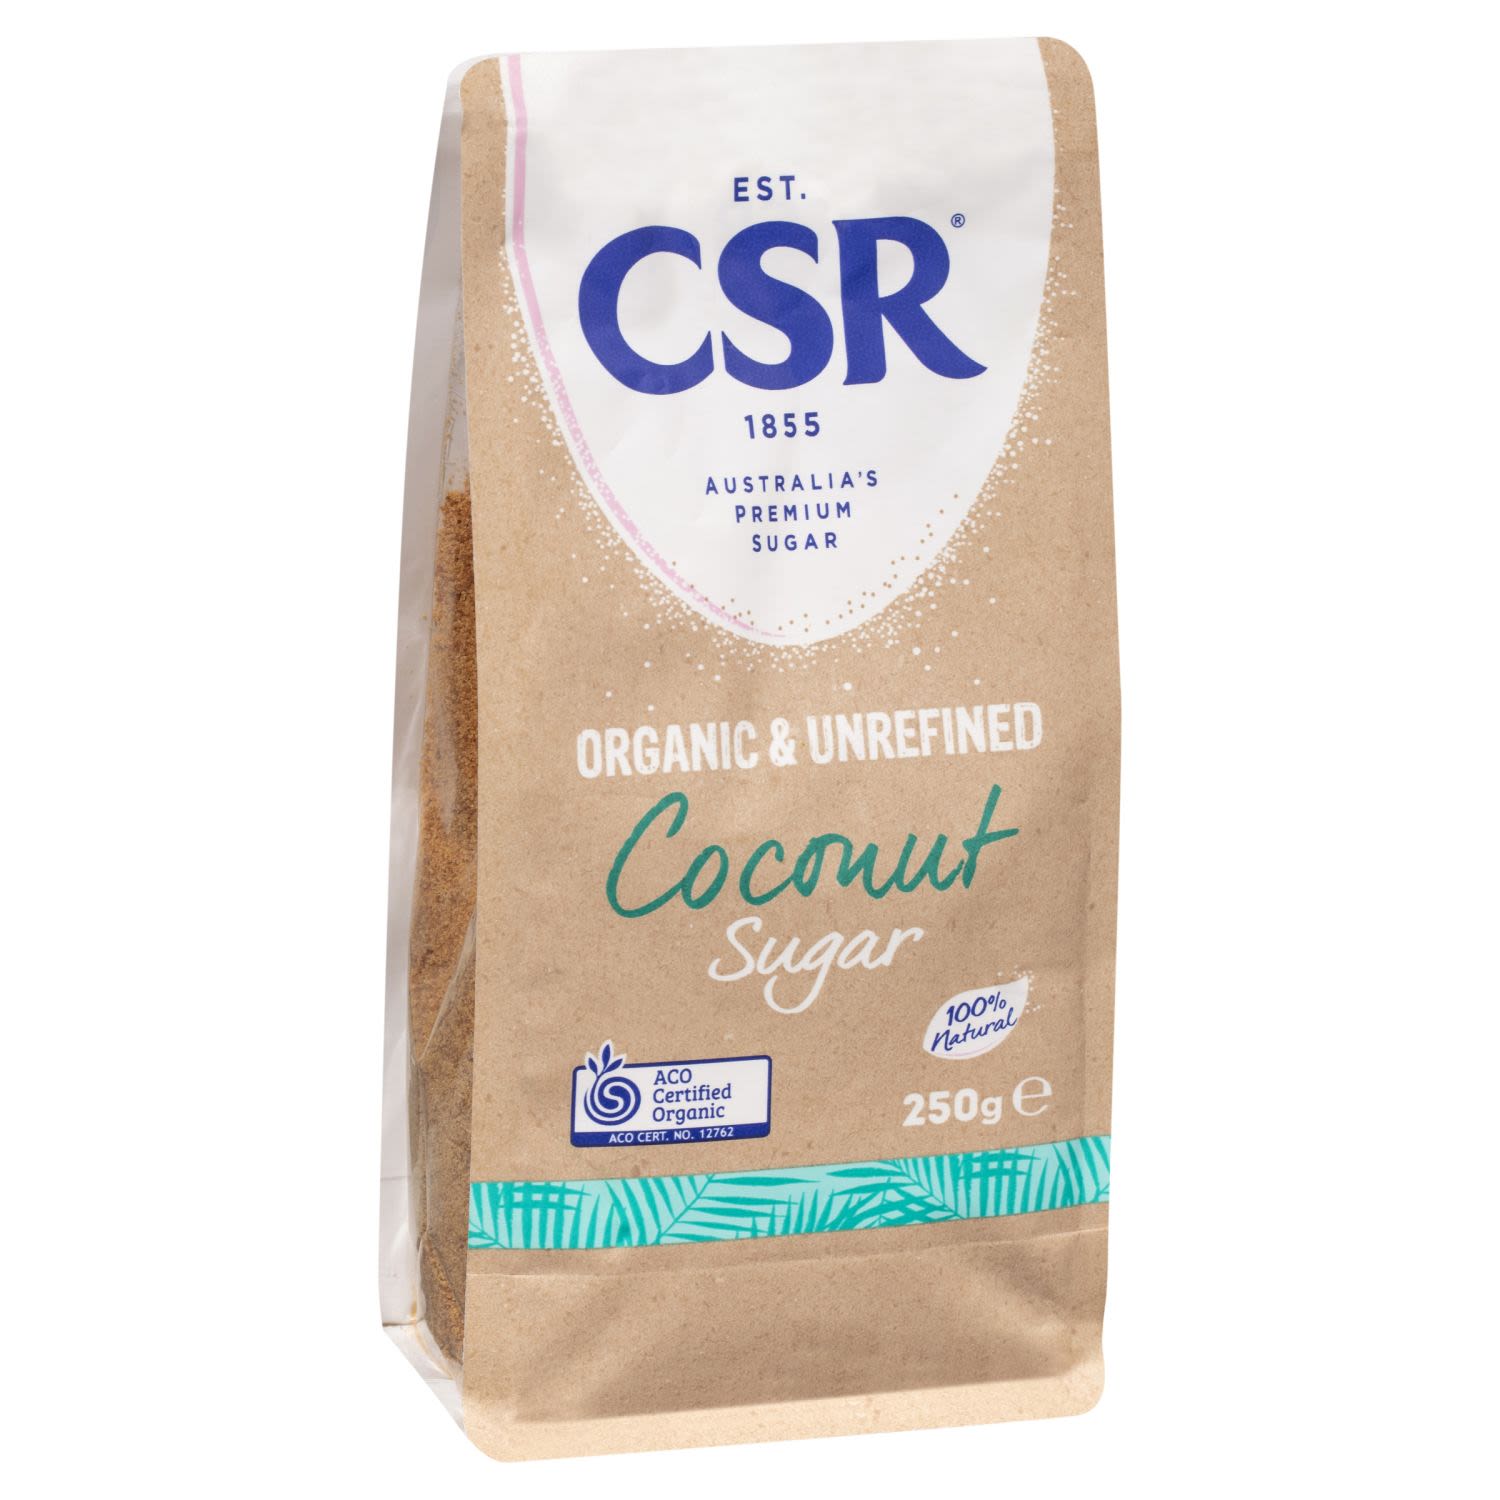 Harvested using traditional methods, CSR Coconut sugar is unrefined and made from the nectar of coconut blossoms from certified organic coconut palms.<br/> <br/> With it's caramel taste and fine crumb-like granules this specialty sugar can bring taste dimension and texture to your cooking or baking. When melted it acquires a hazel brown colour, making it perfect for caramel toppings, warm deserts and beverages.<br/> <br/> Use as an alternative for white, raw, brown or palm sugar.<br /> <br />